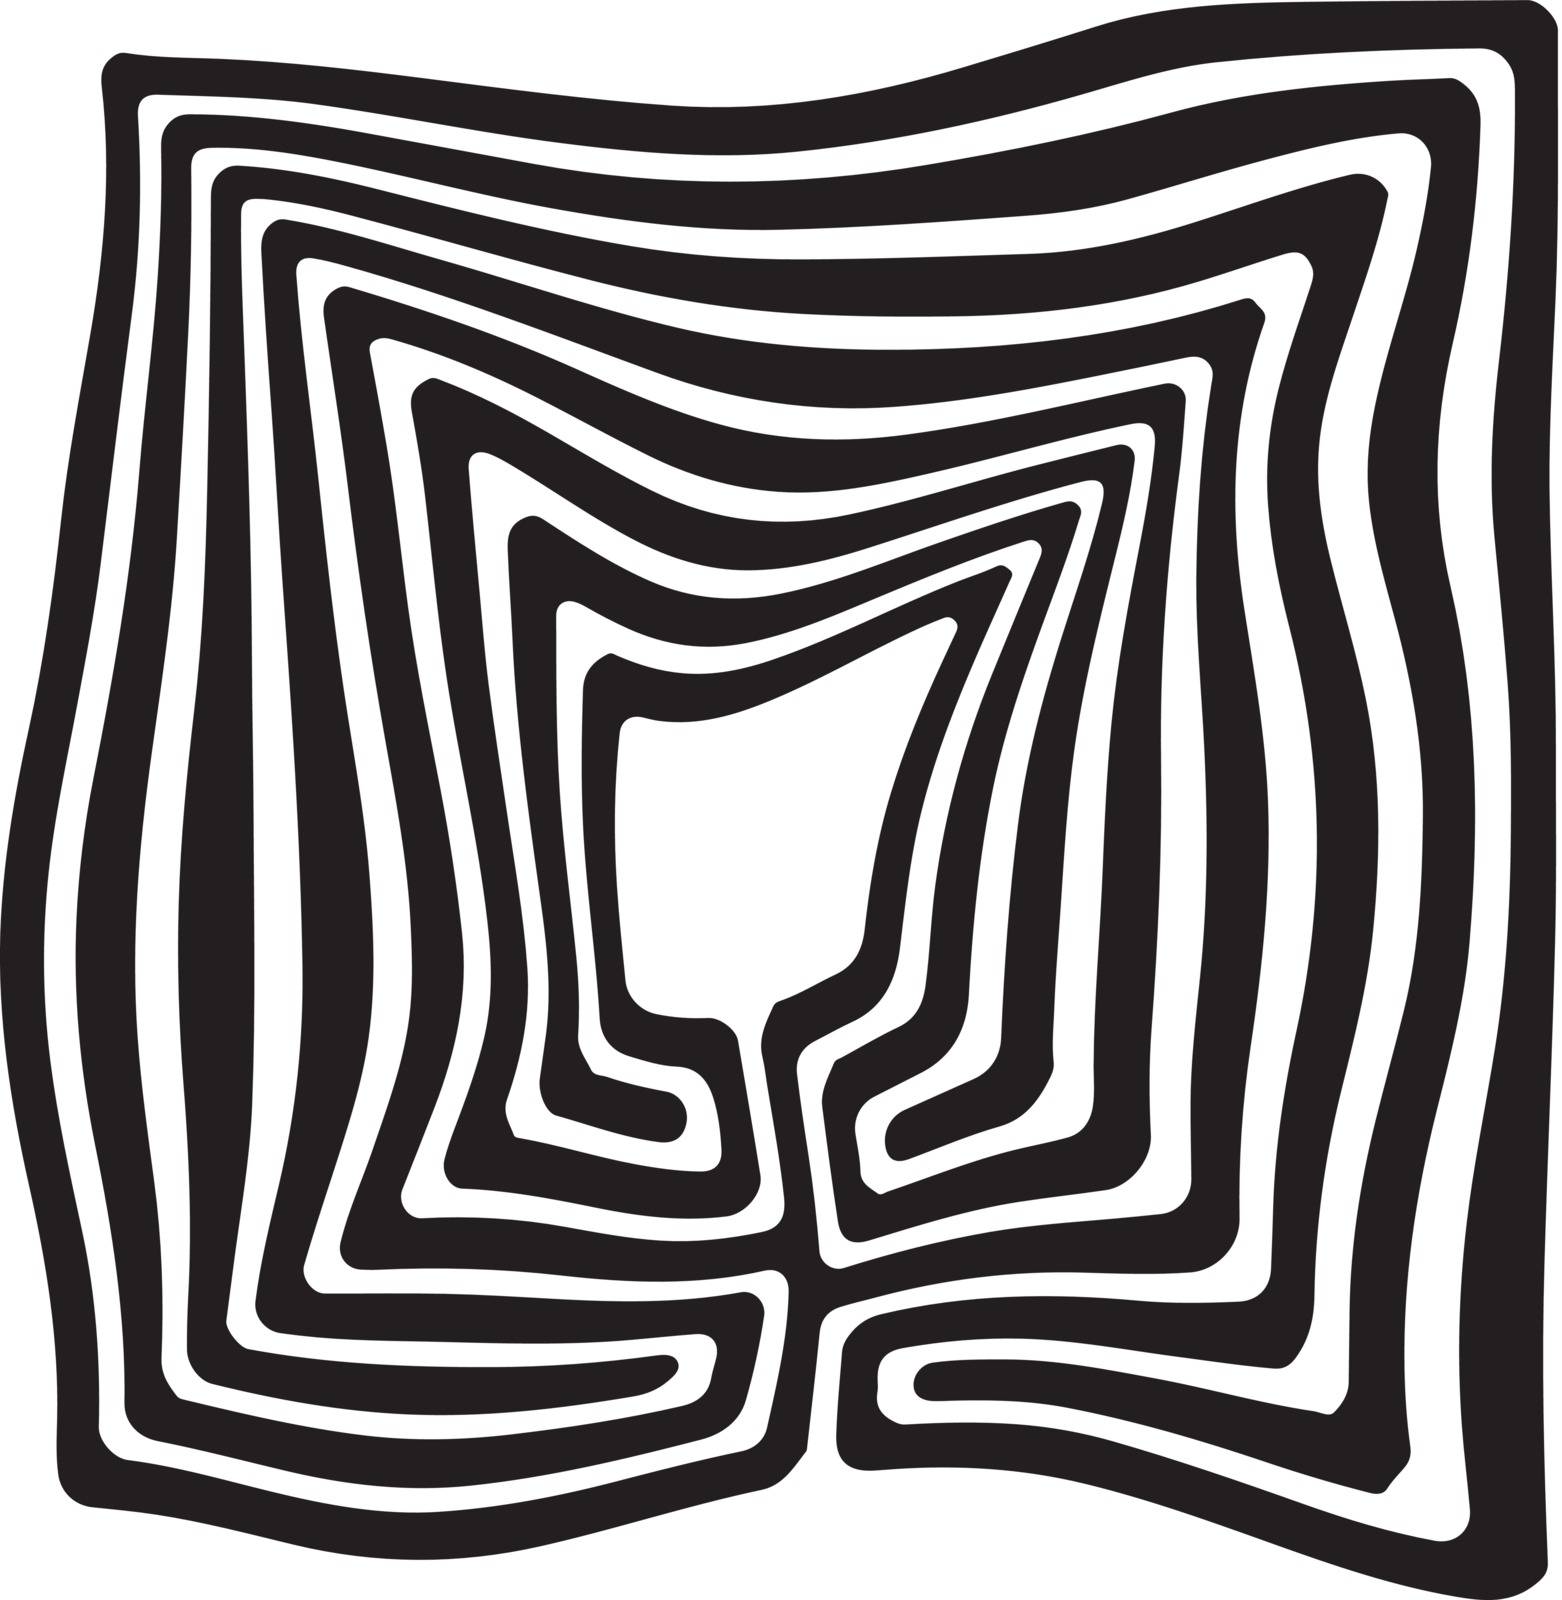 Distorted faces the classical labyrinth. Vector illustration.